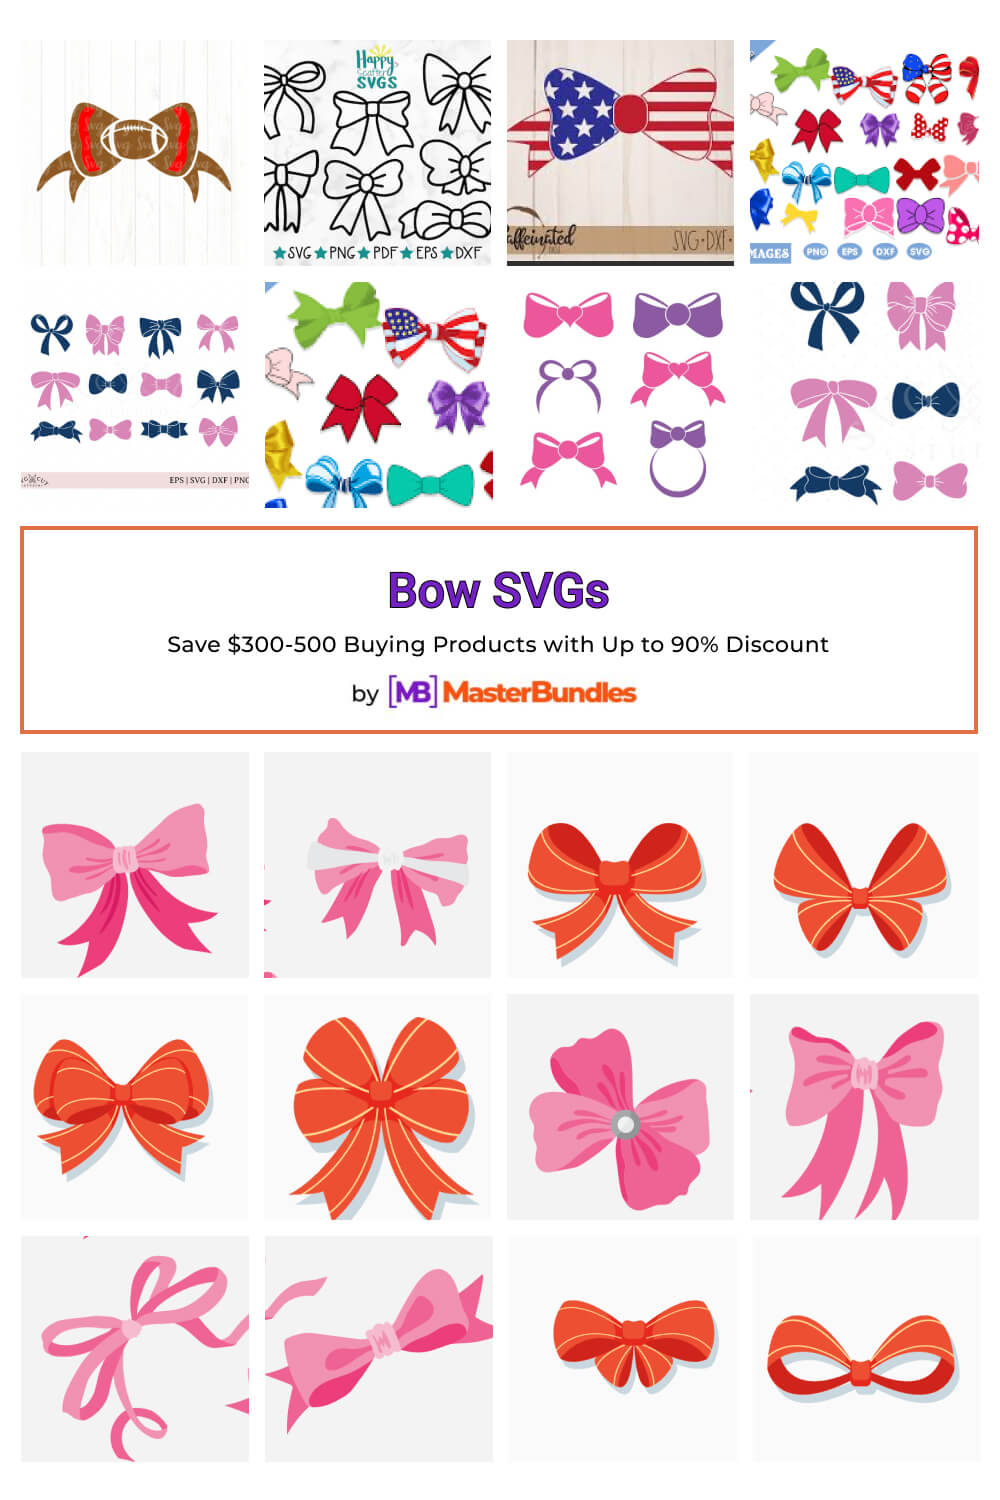 bow svgs pinterest image.